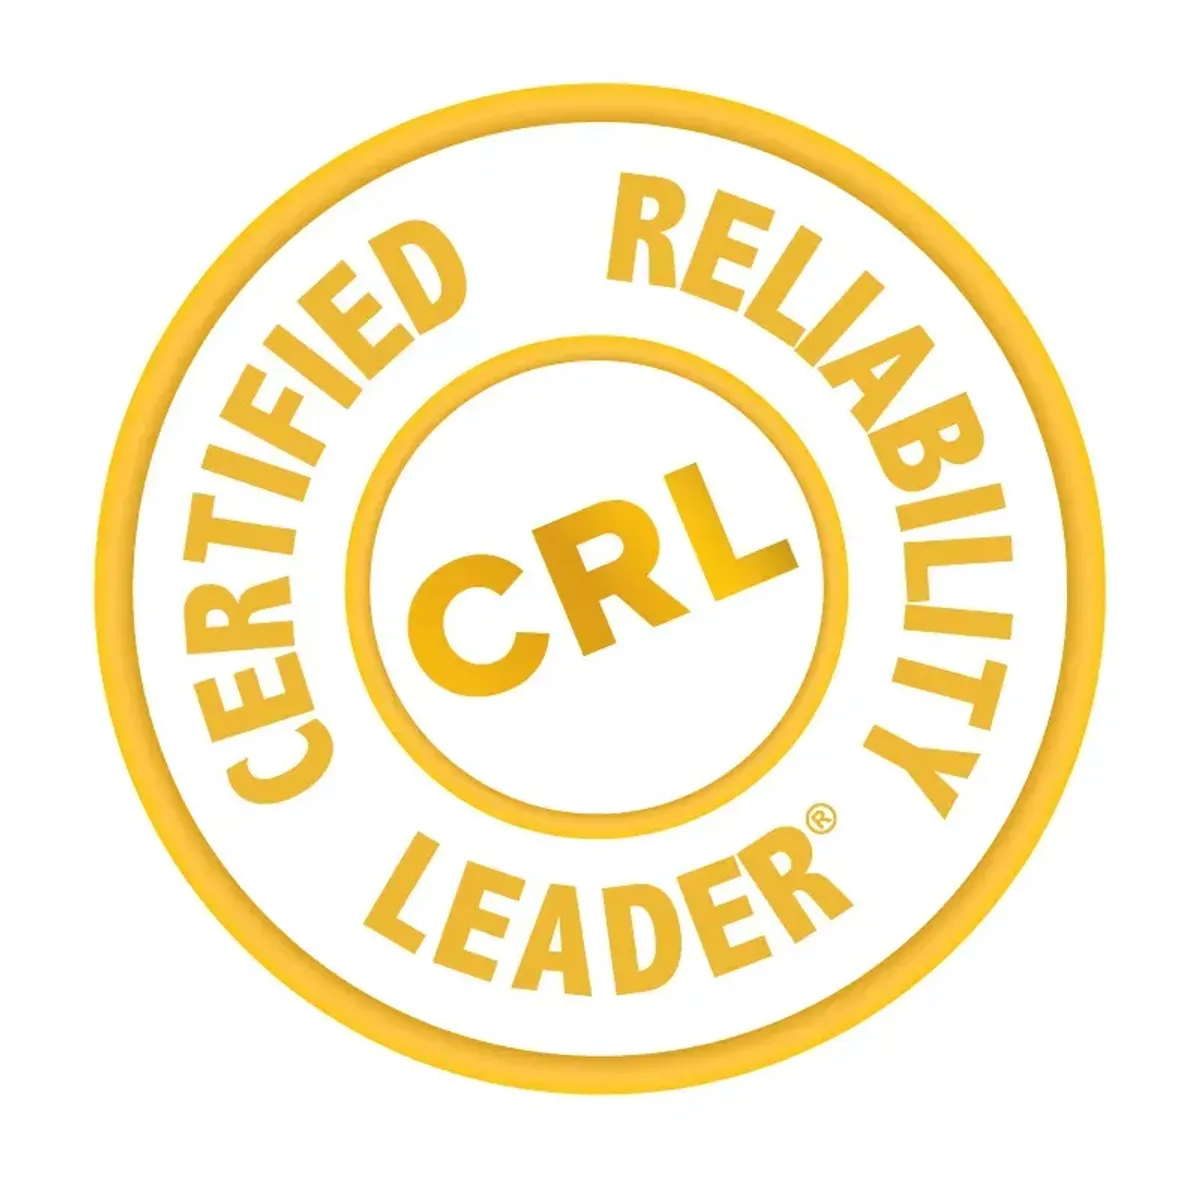 Certified Reliability Leader Workshops at the 36th International Maintenance Conference (IMC) 2022